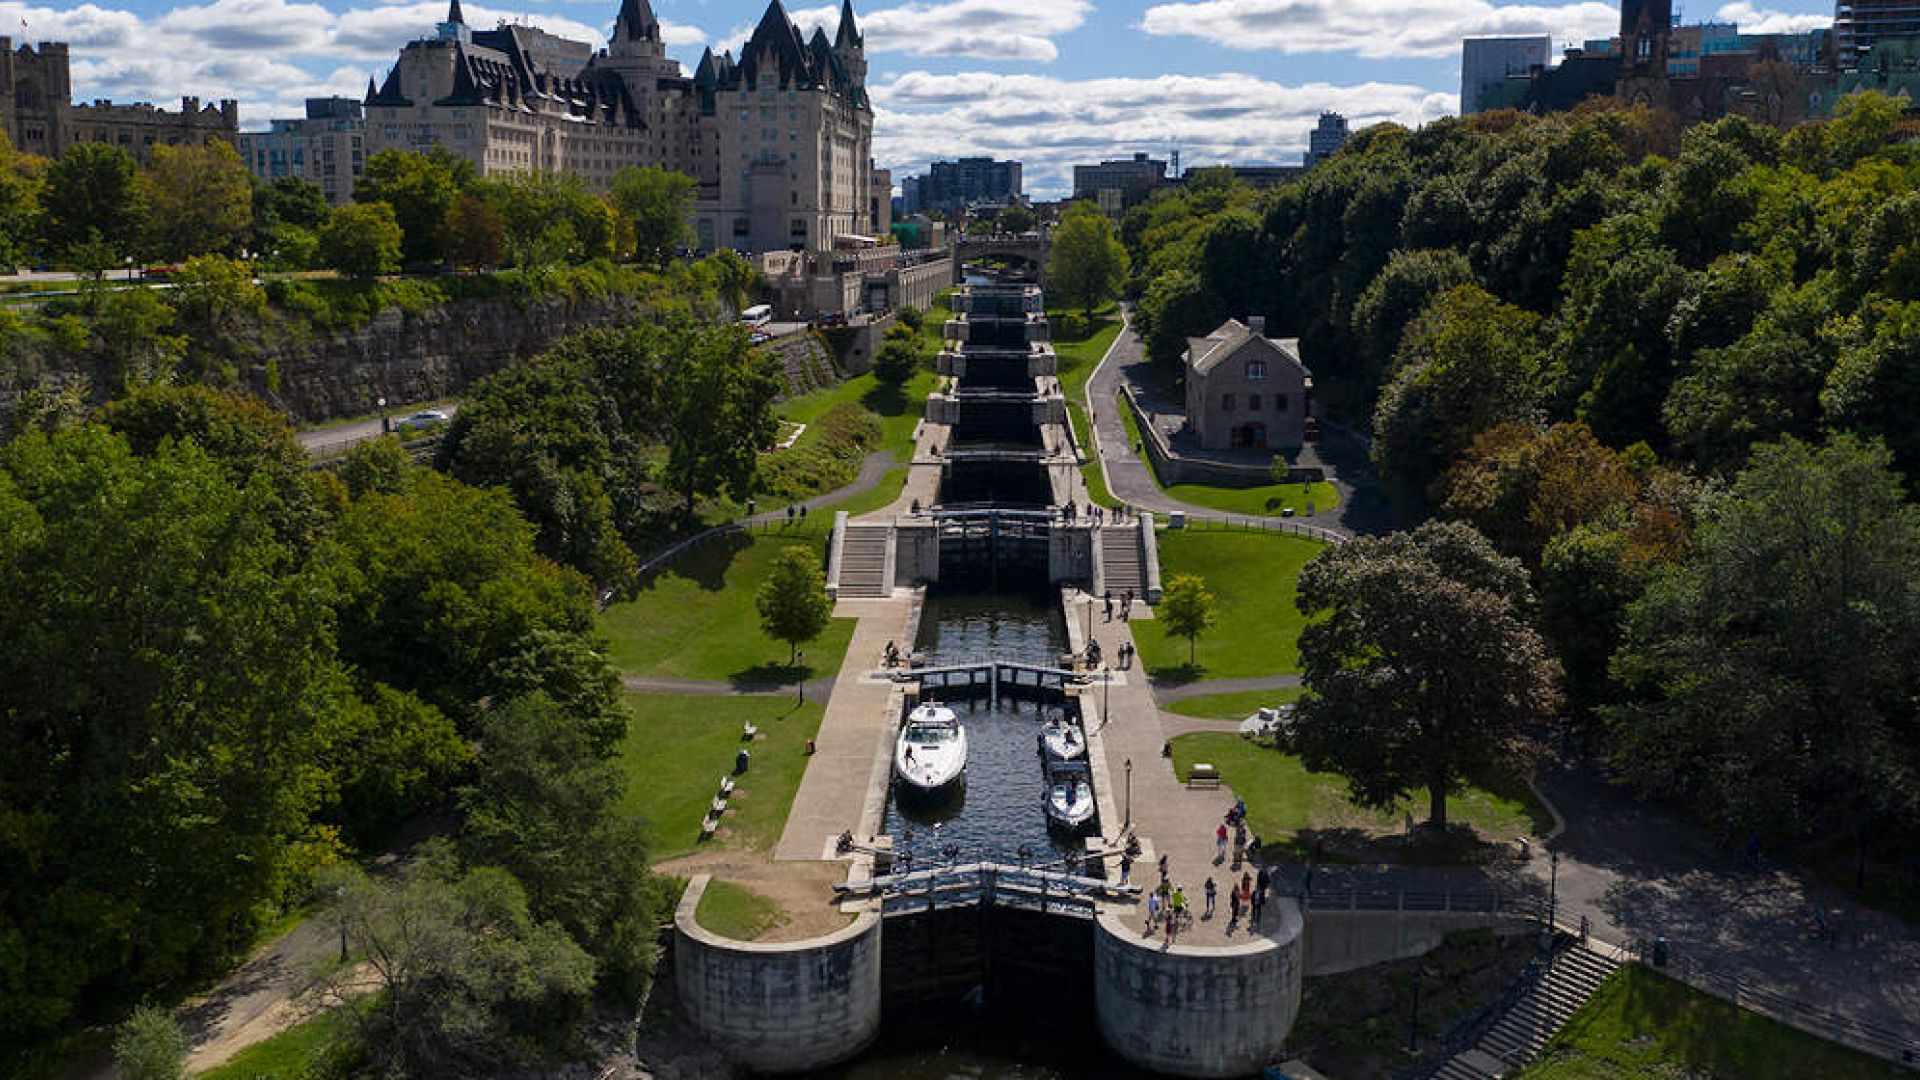 Boaters locking through the Ottawa Locks on a summer day. The Chateau Laurier is seen in the distance.